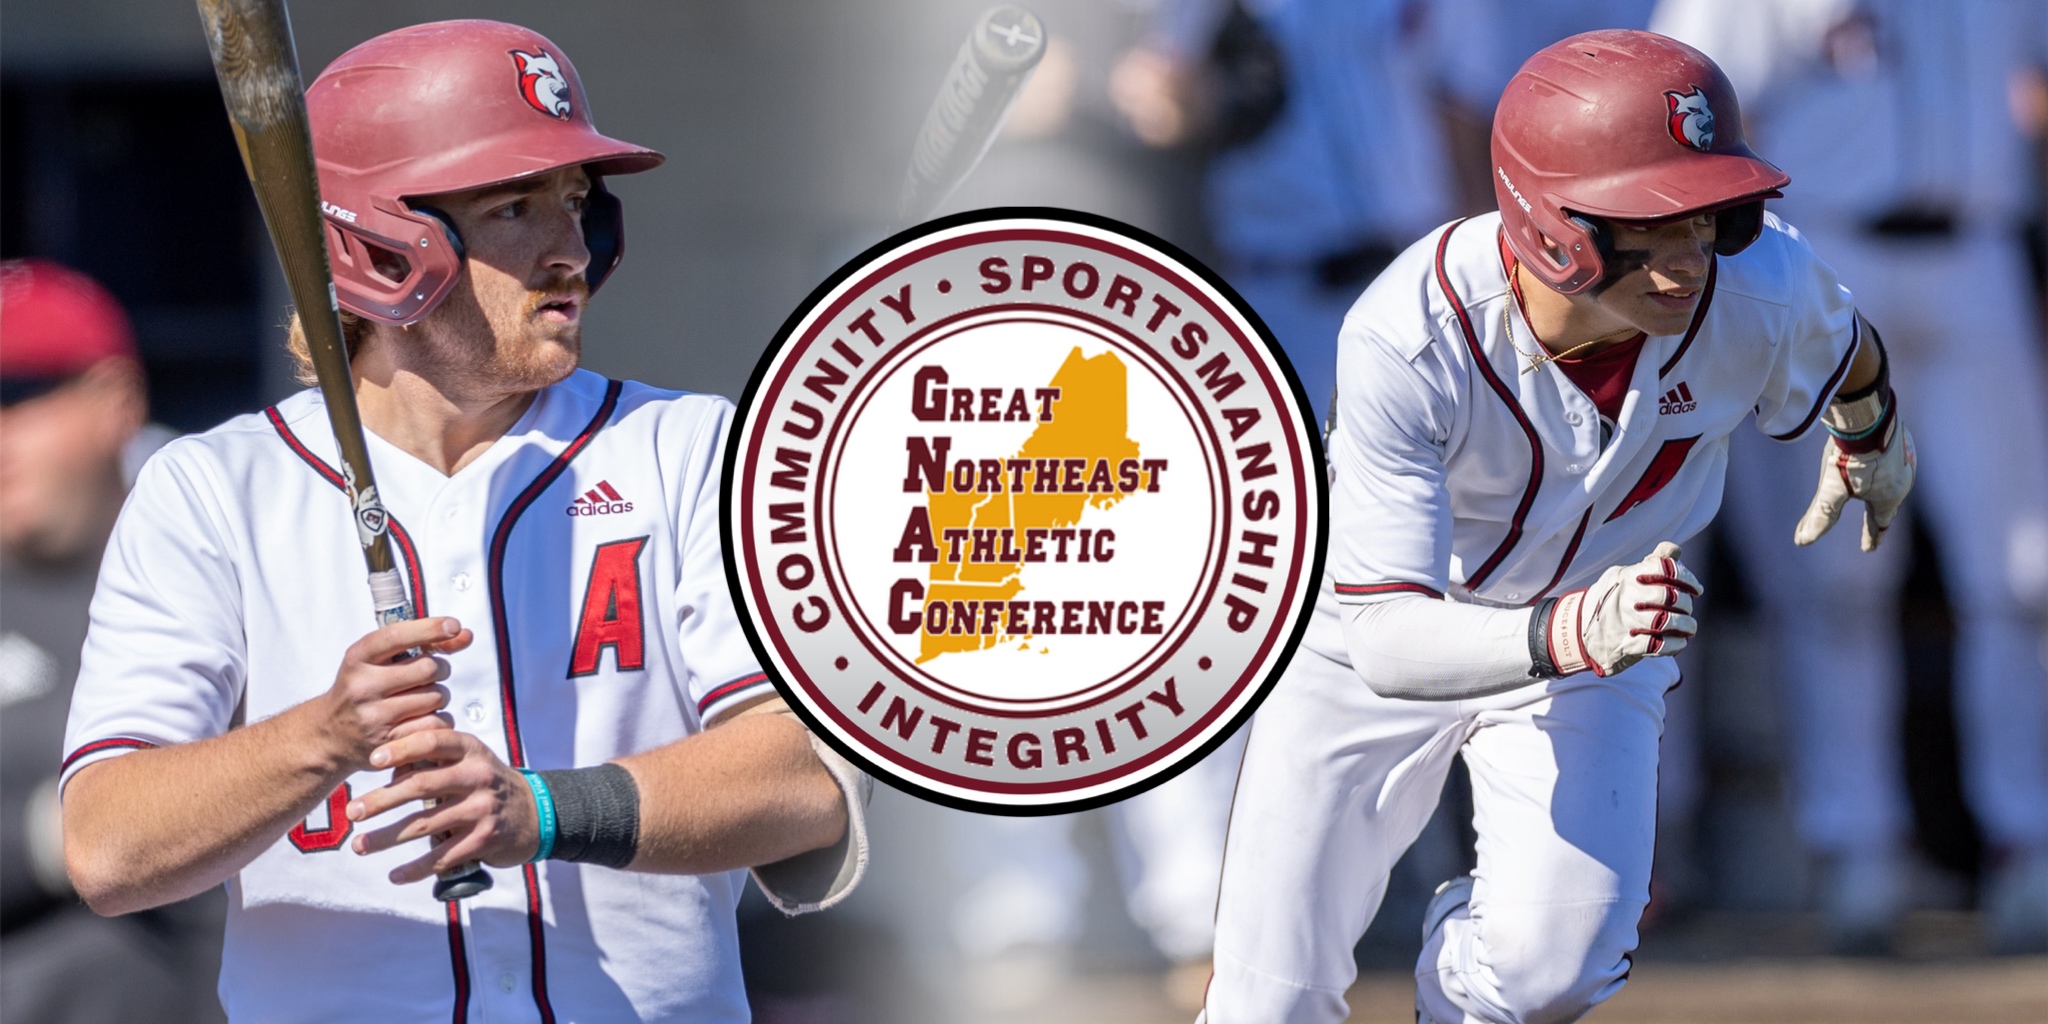 Drosidis and Denison Earn All-Conference Honors